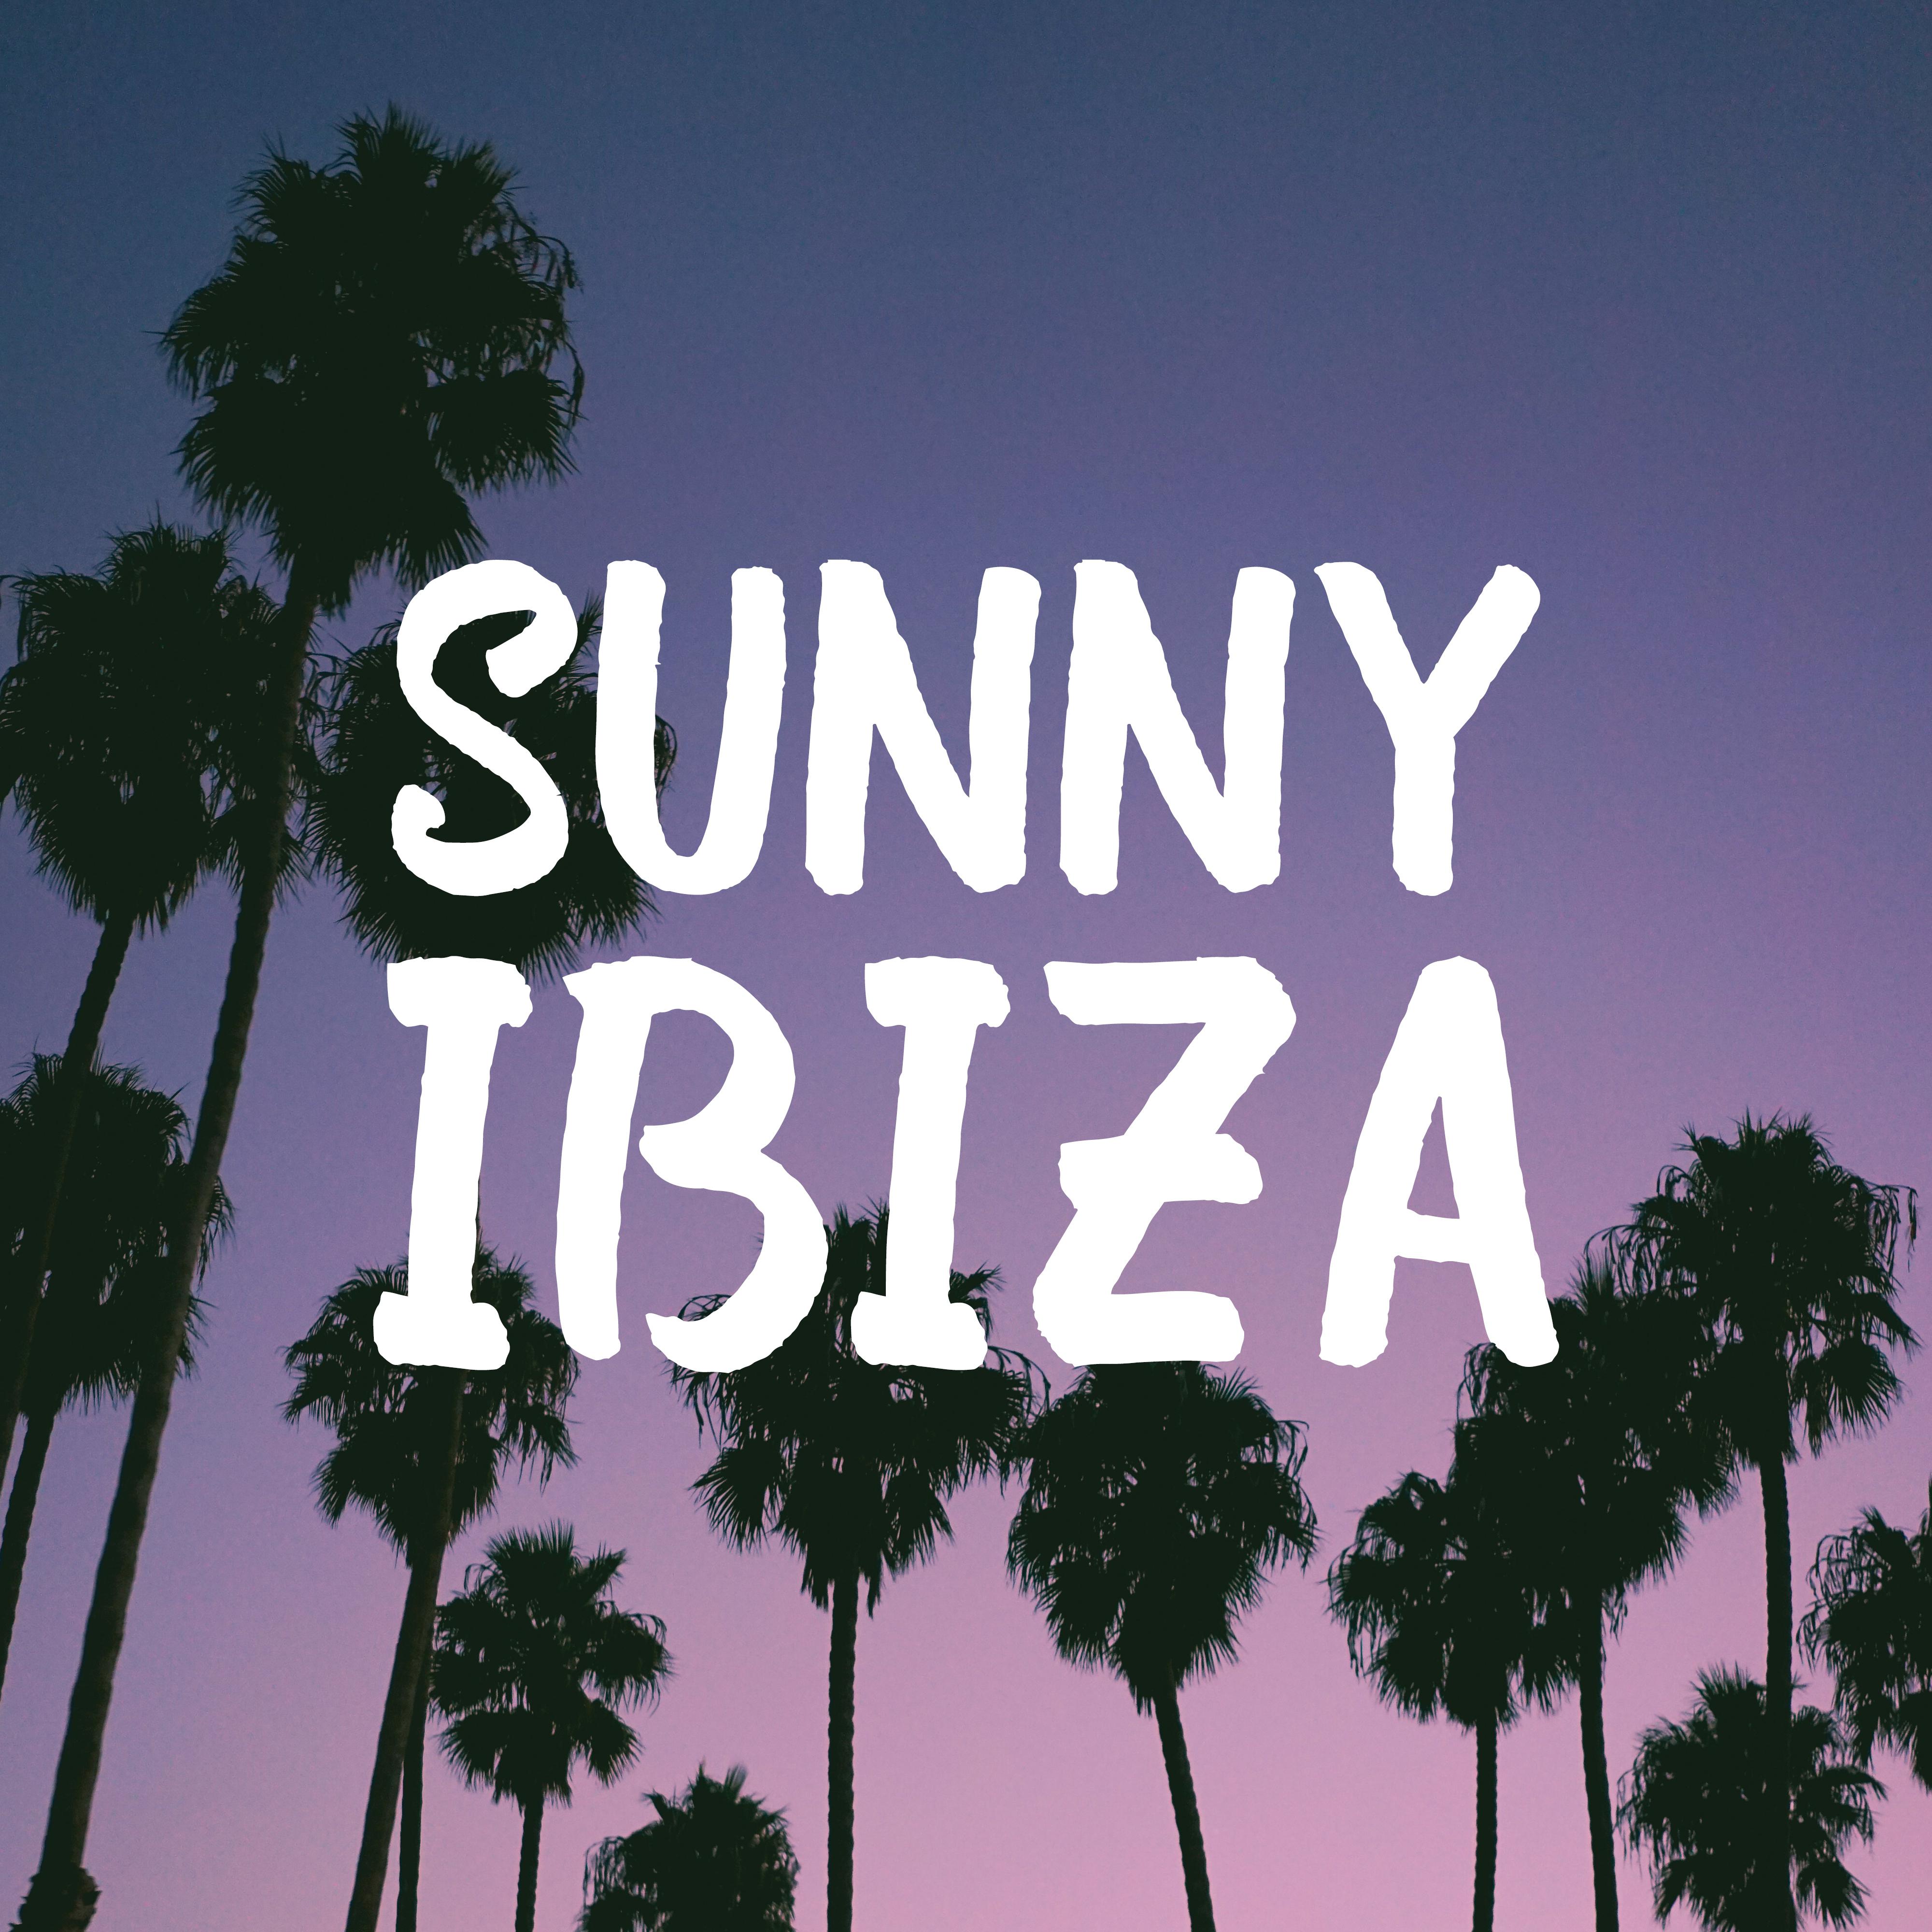 Sunny Ibiza: Club Rhythms, Exotic Dance, **** Chillout Tunes, Chillax Zone, Party Melodies 2019